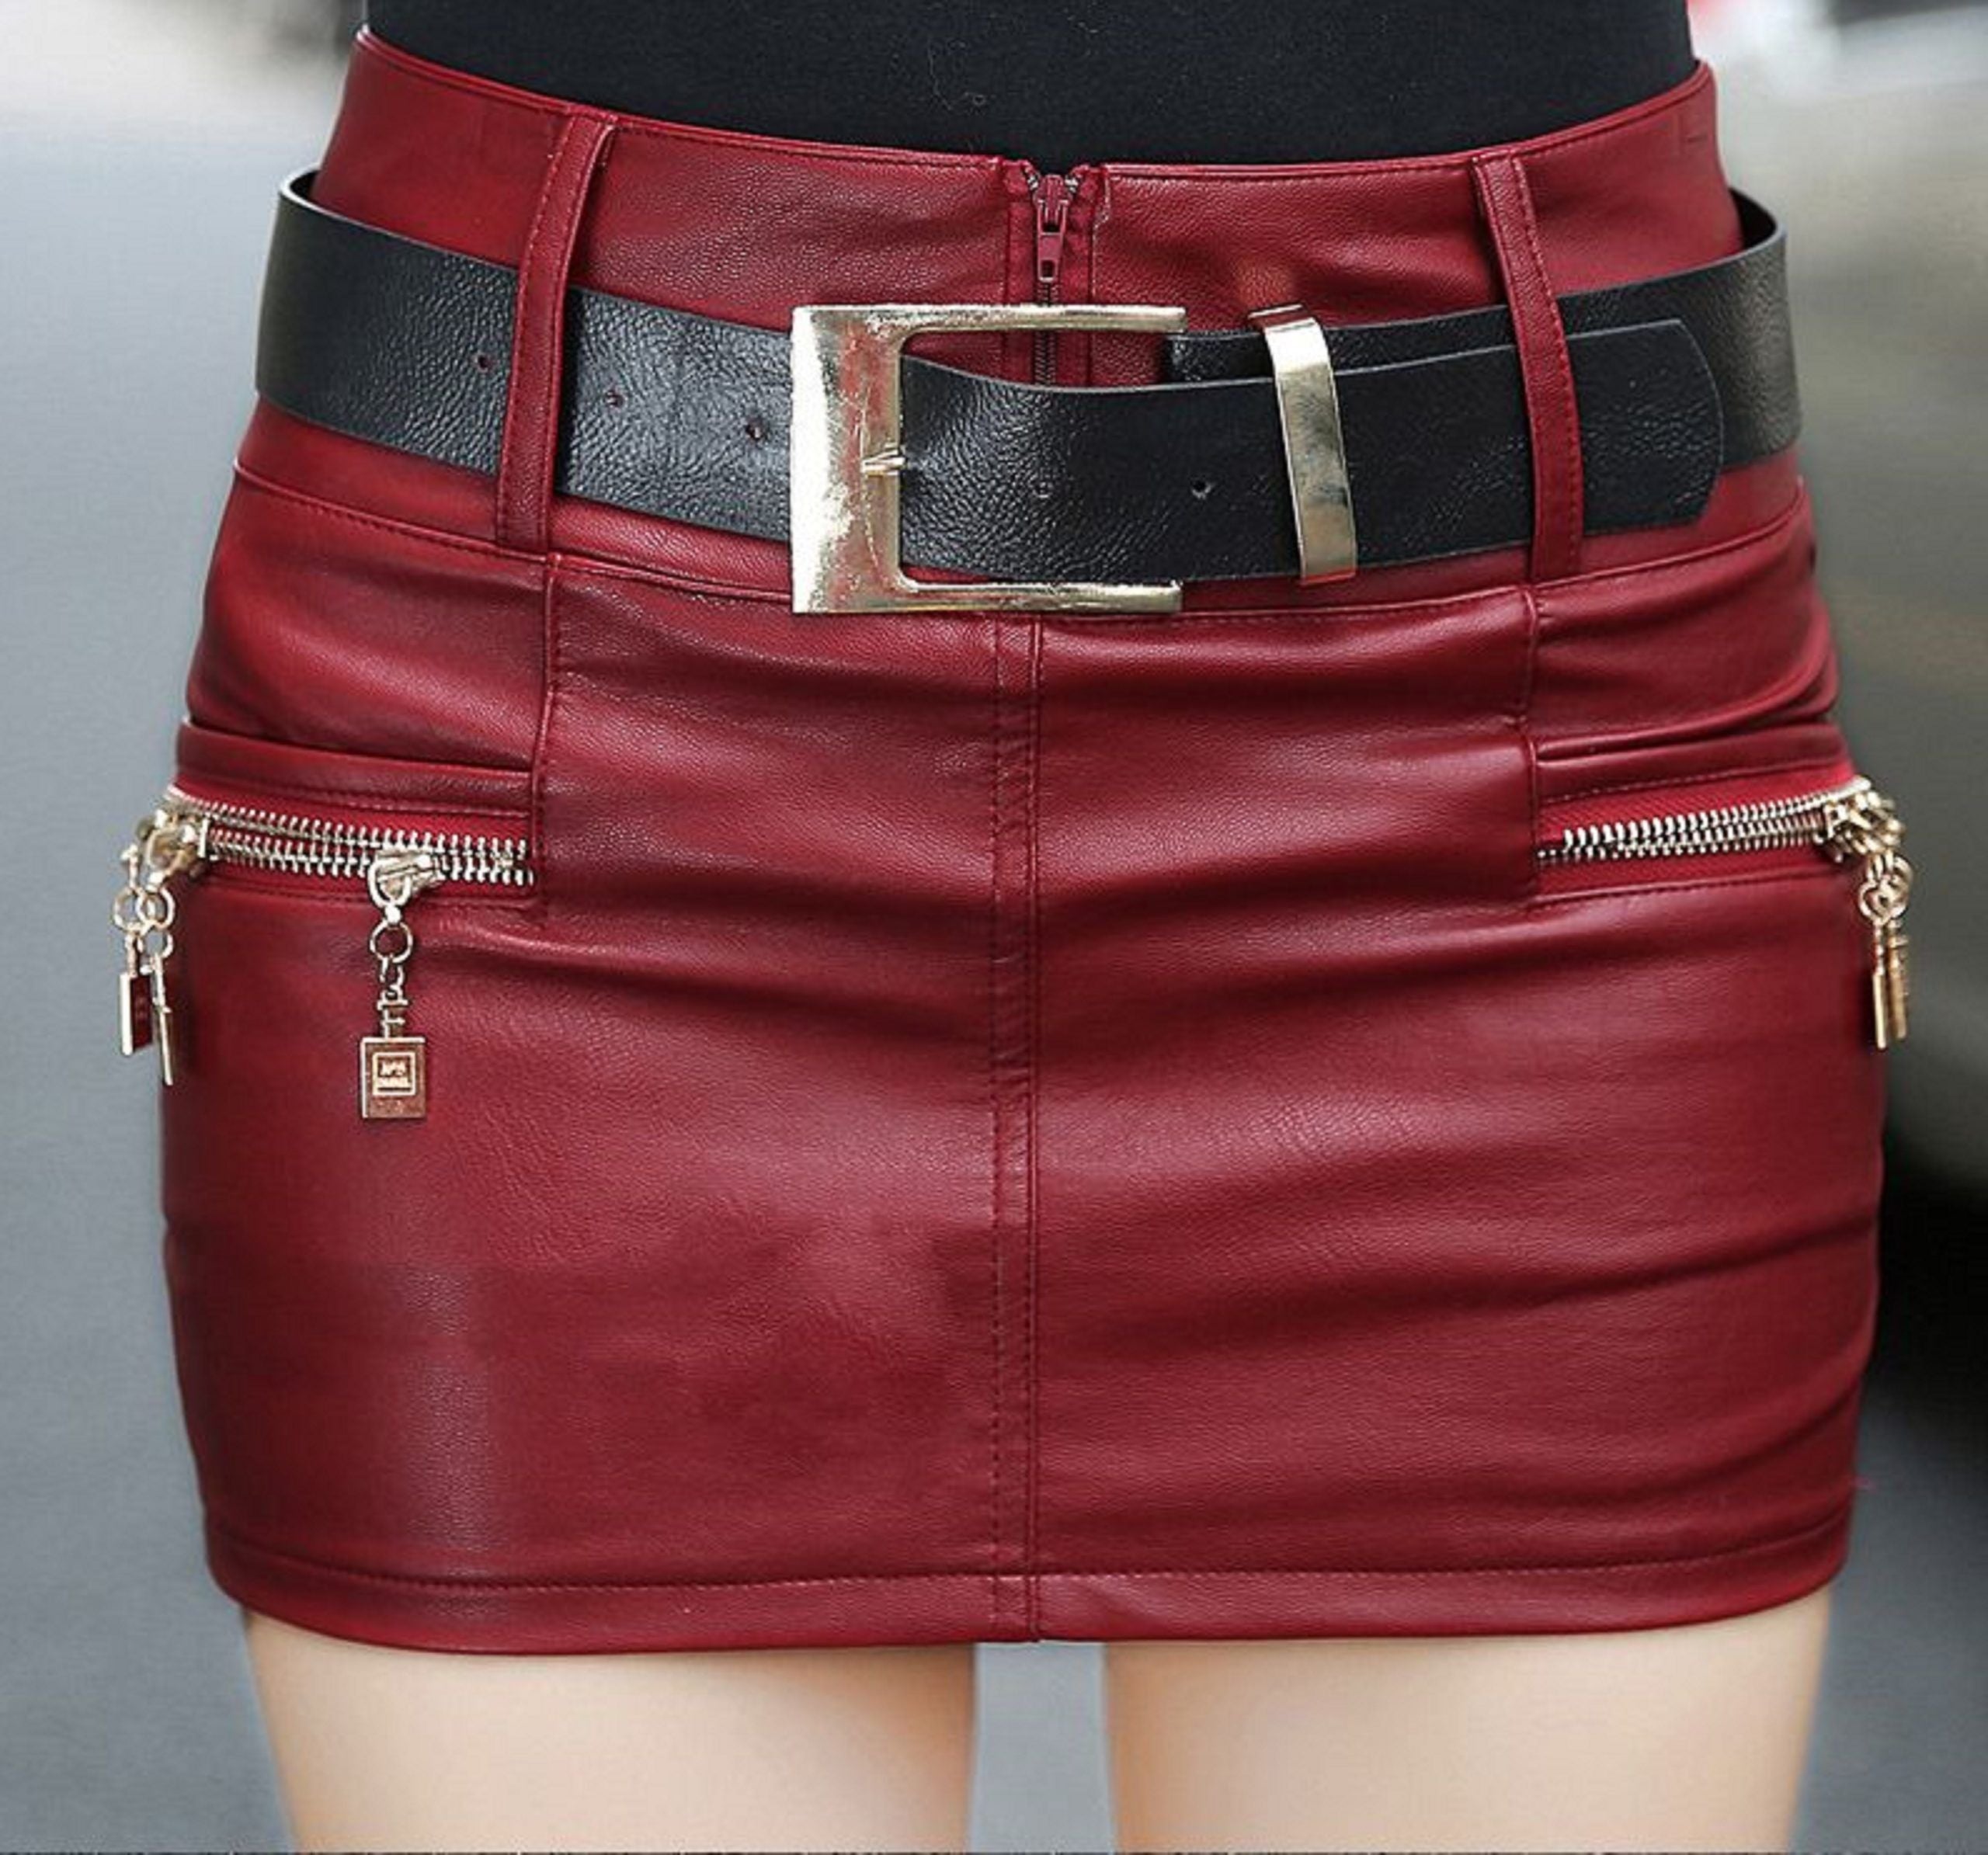 A woman in a red Maramalive™ Faux Leather Mini Skirt - Vegan-Friendly Leather Belt Skirt